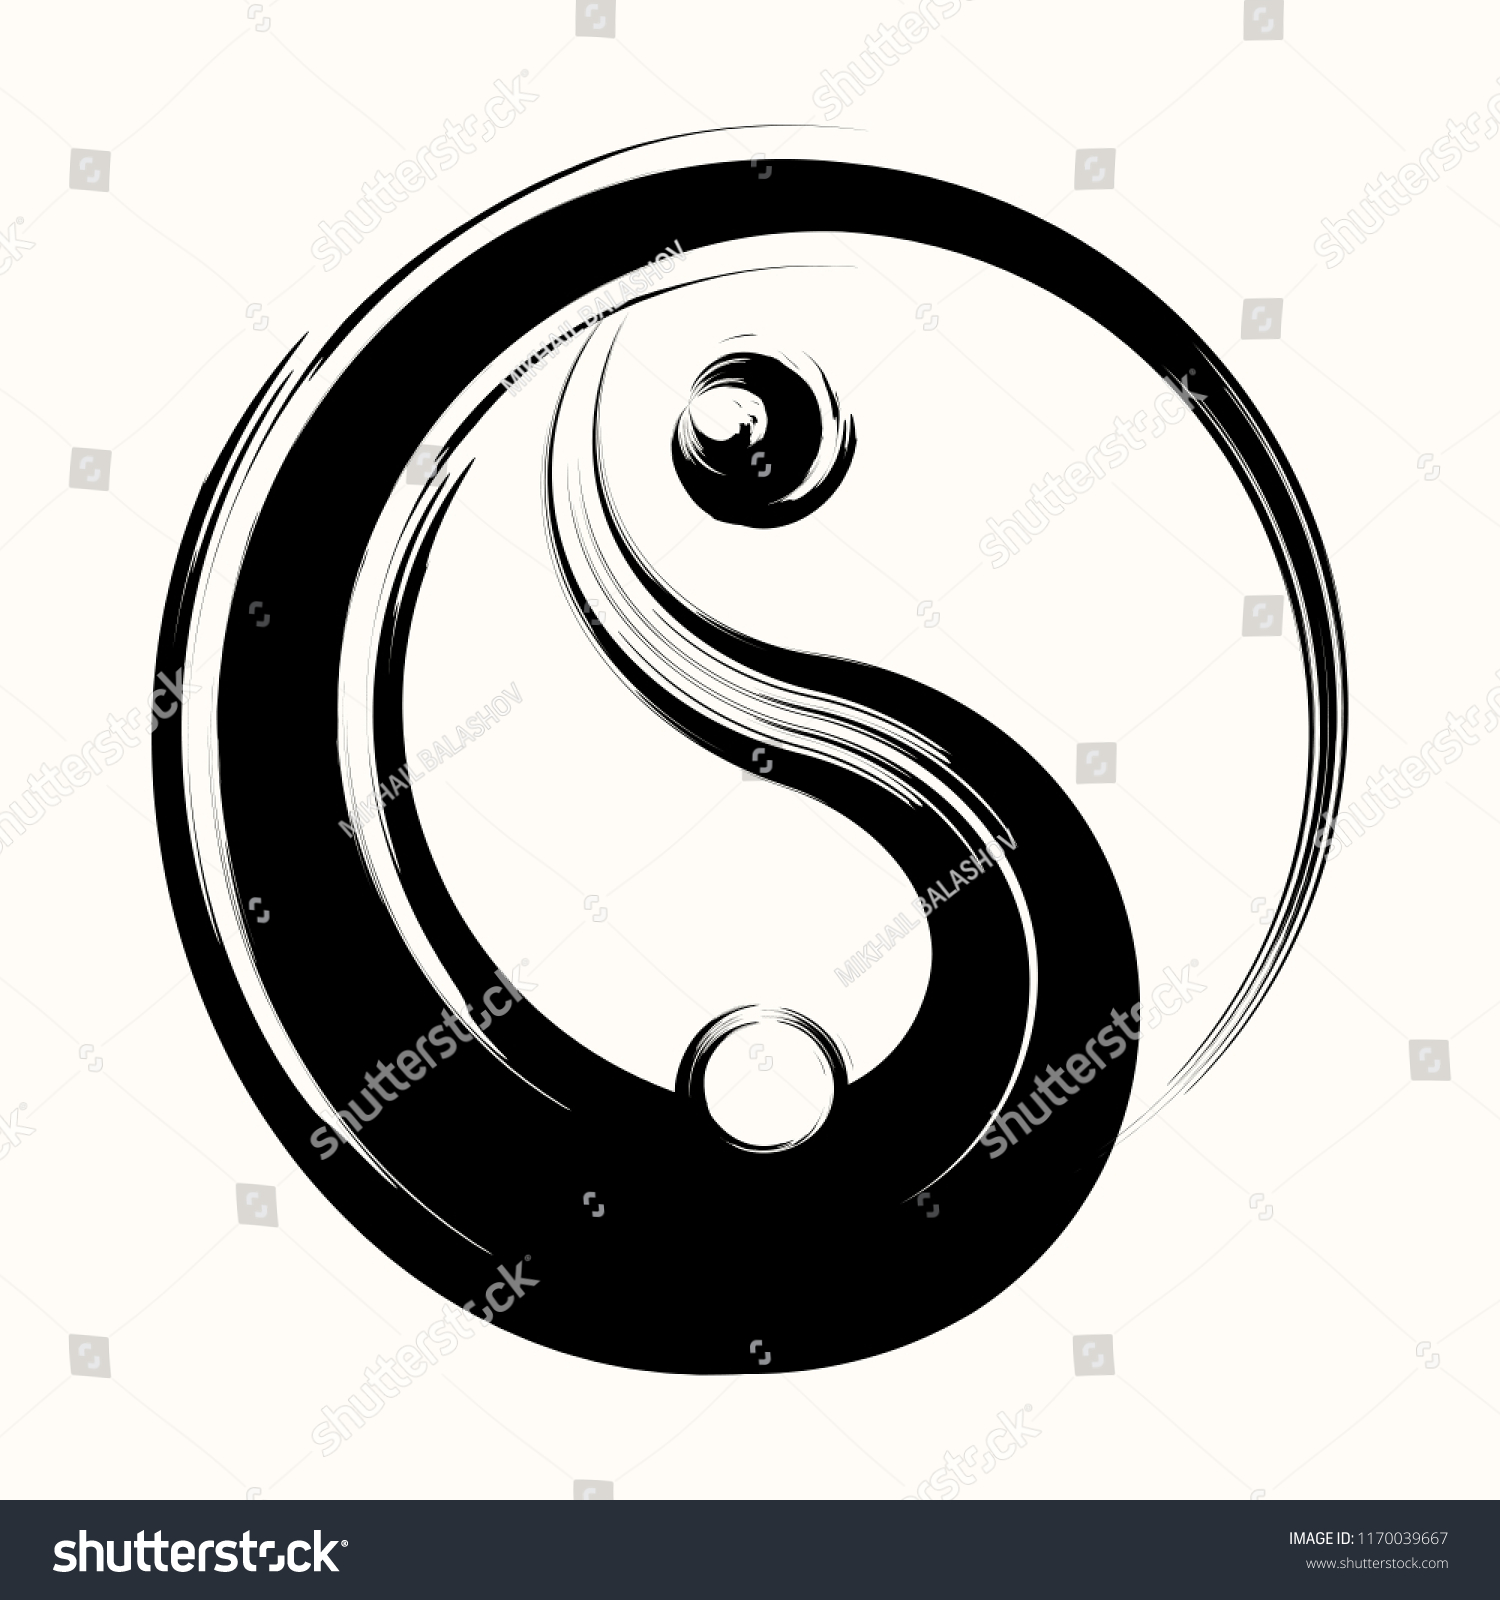 SVG of Sacred geometry. Hand drawn yin yang symbol of harmony and balance, vector design element. Asian icon. Black and white. Beginning. Grunge style. Vector illustration. svg